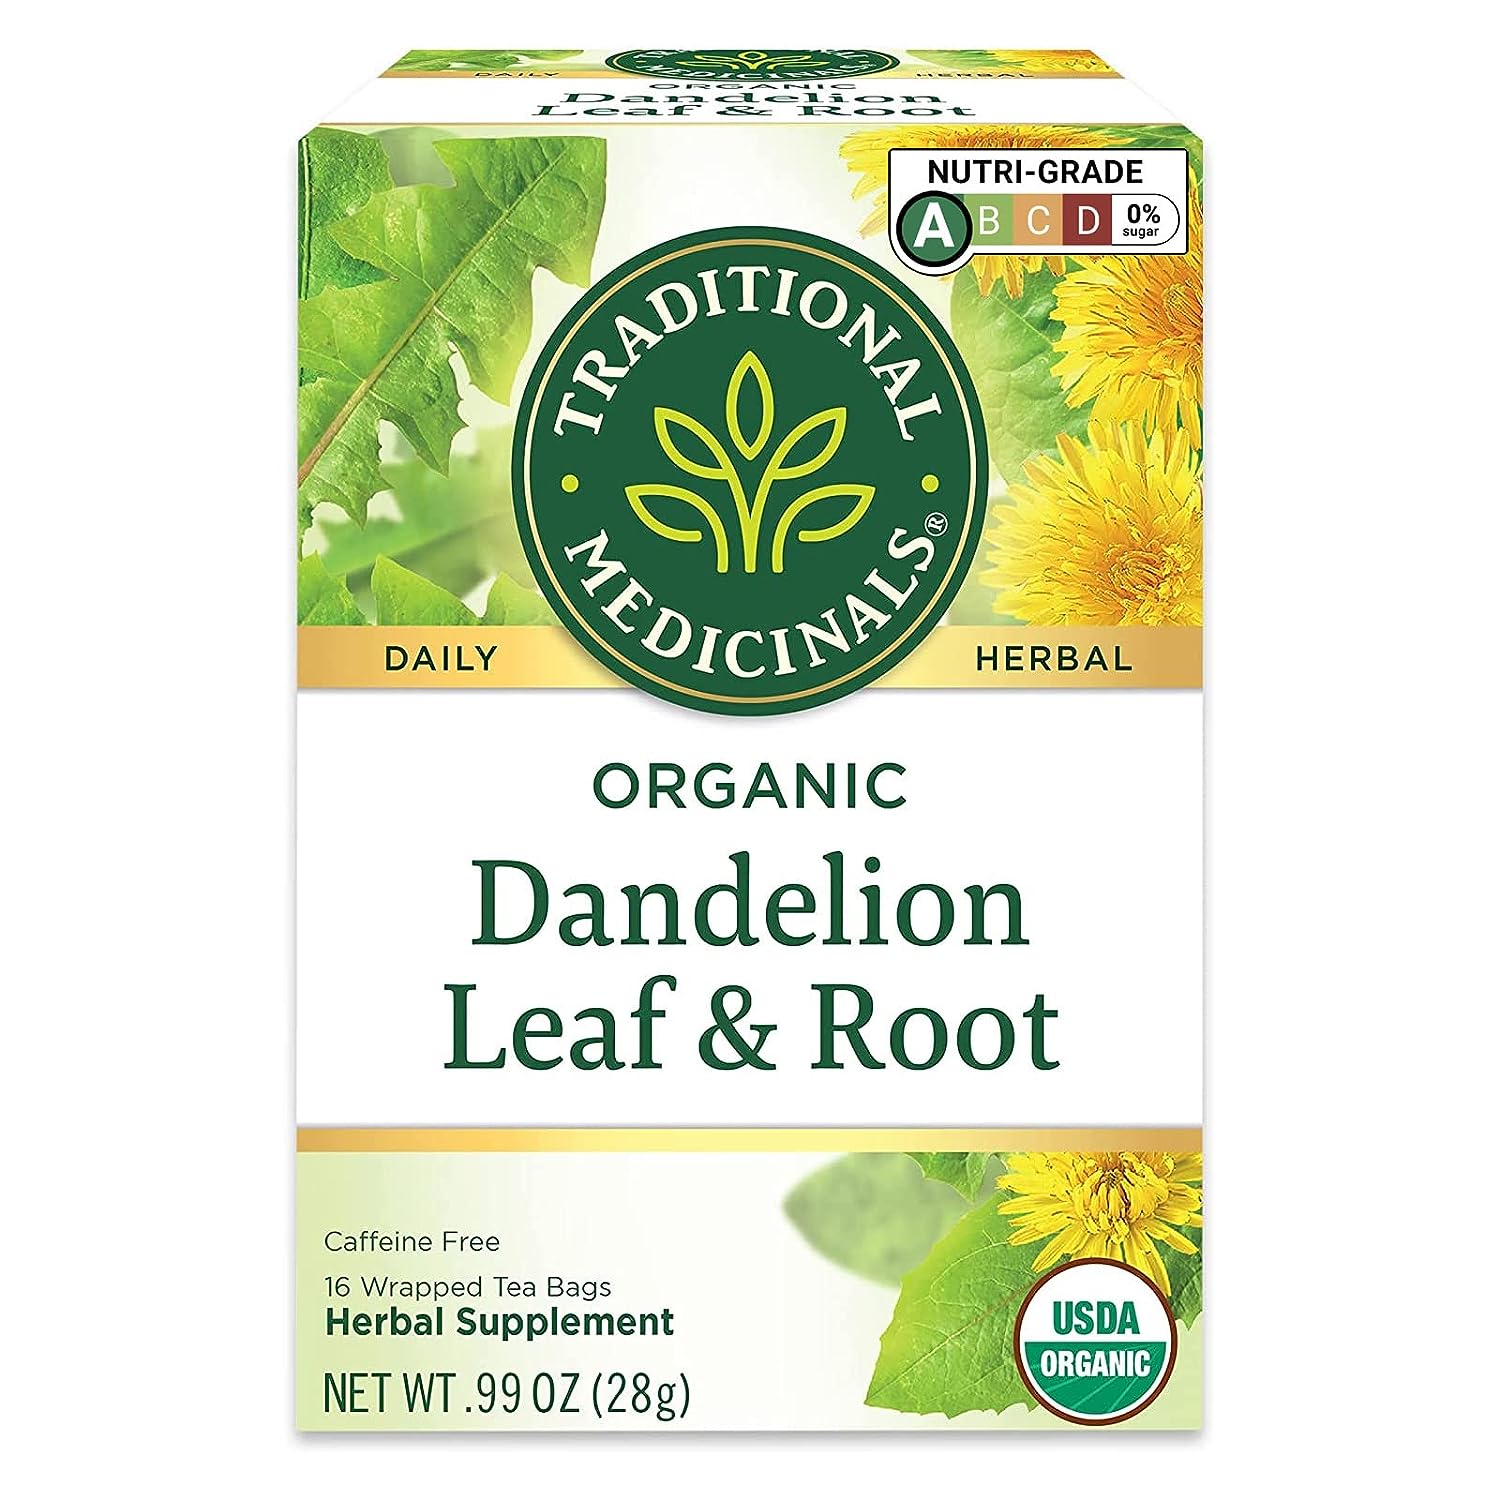 Traditional Medicinals Tea, Organic Dandelion Leaf & Root, Supports Kidney Function & Healthy Digestion, 16 Tea Bags